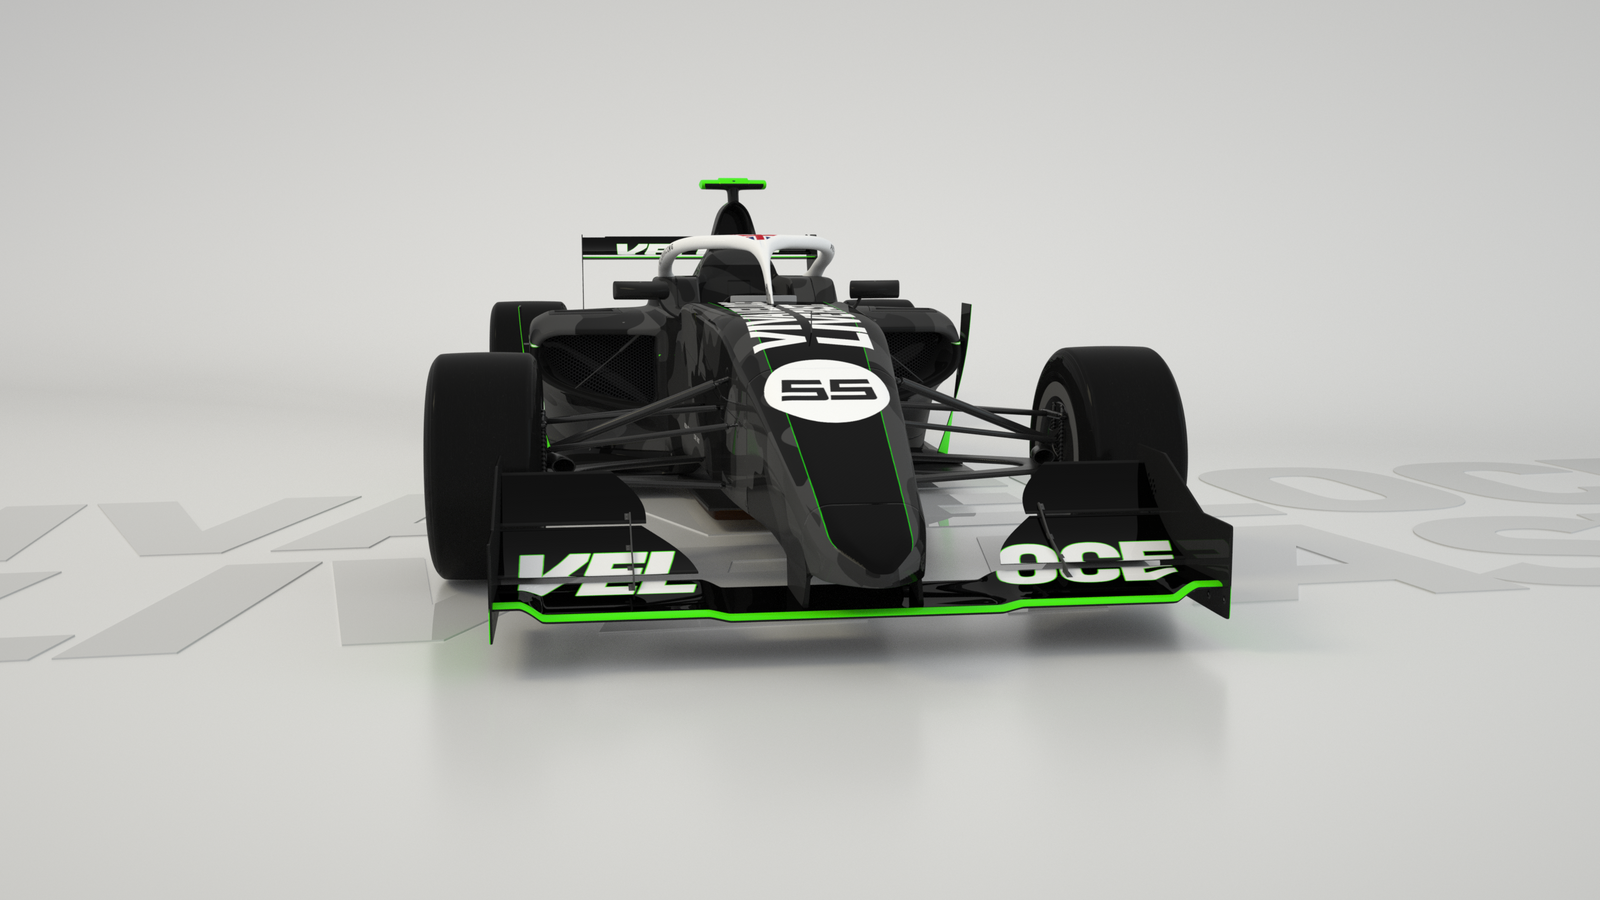 Veloce Racing enters W Series with inaugural champion Chadwick